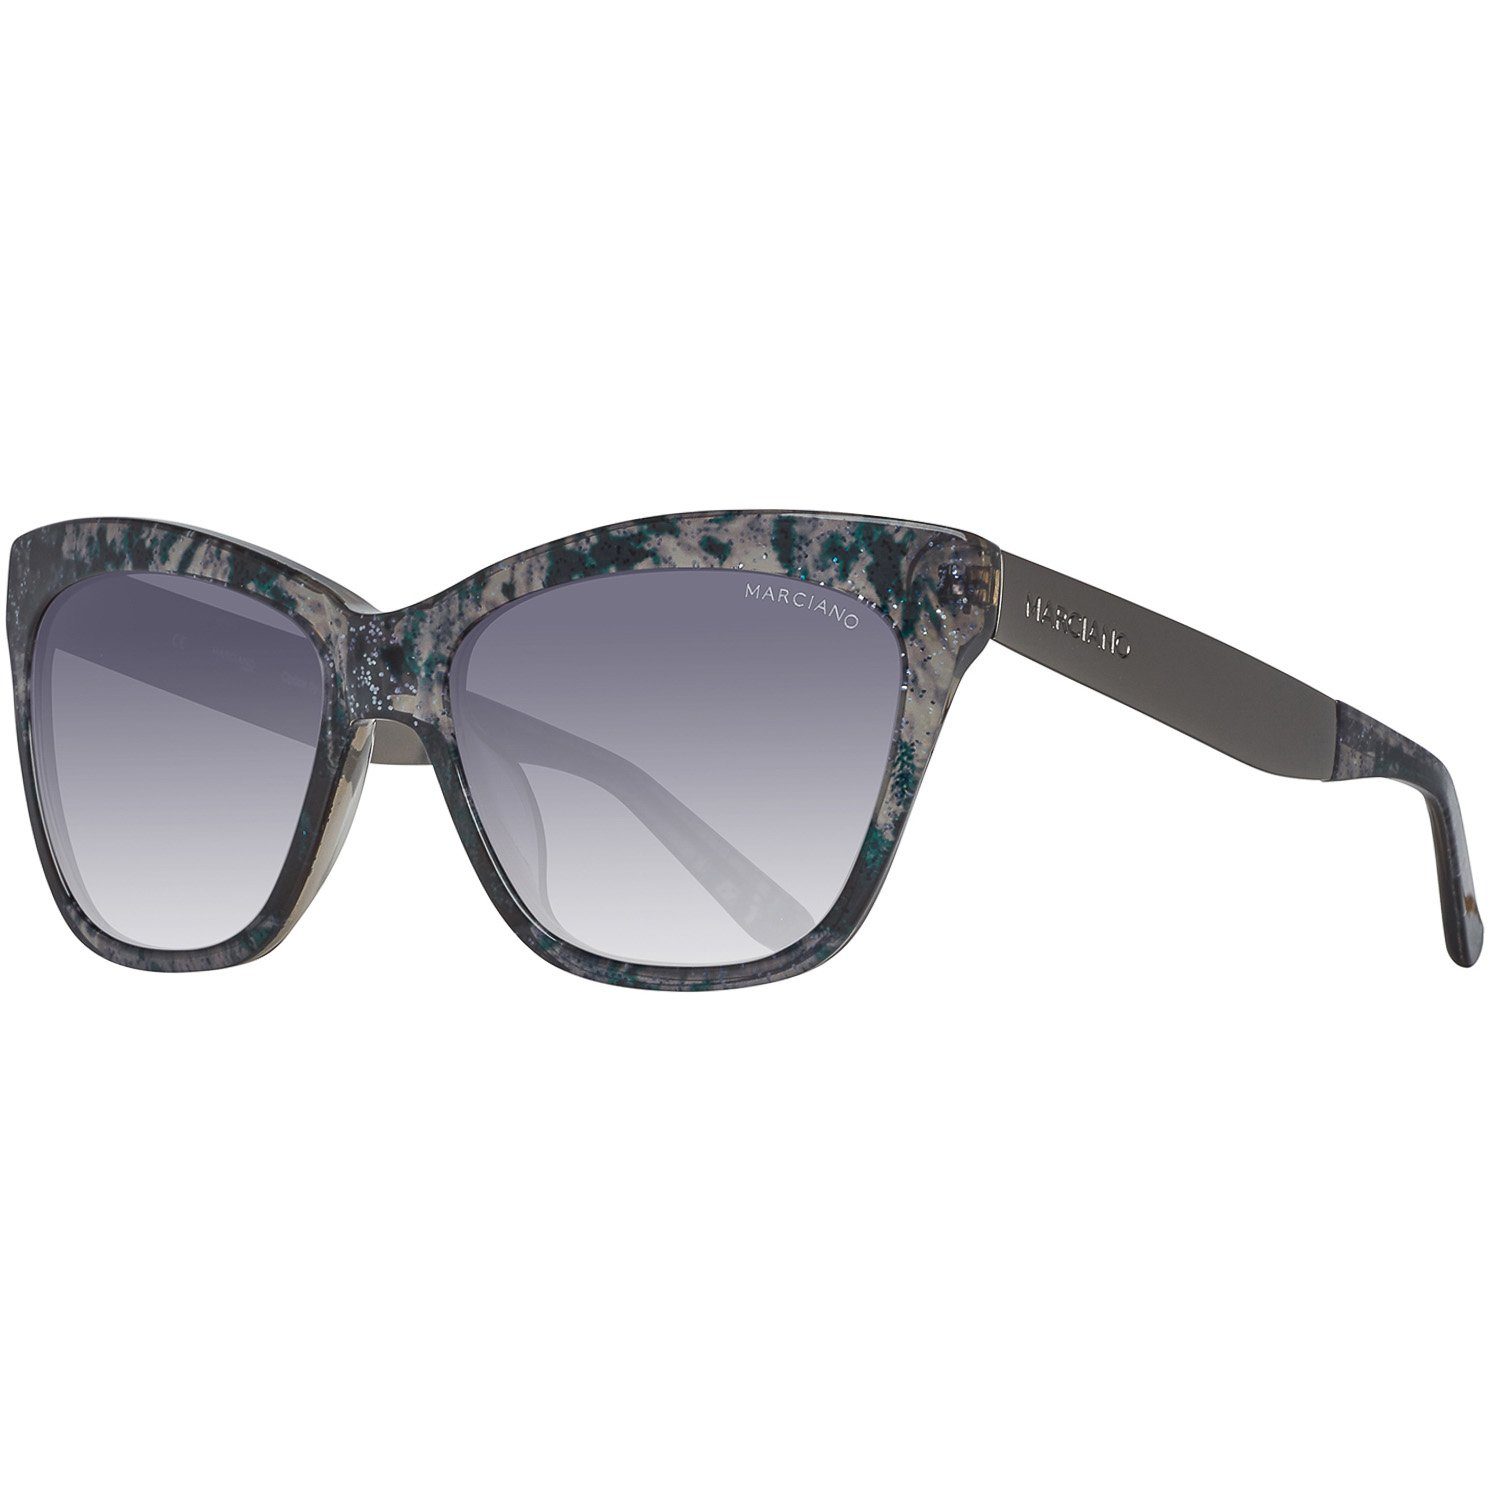 GUESS by MARCIANO Damen Sonnenbrille Mehrfarbig 